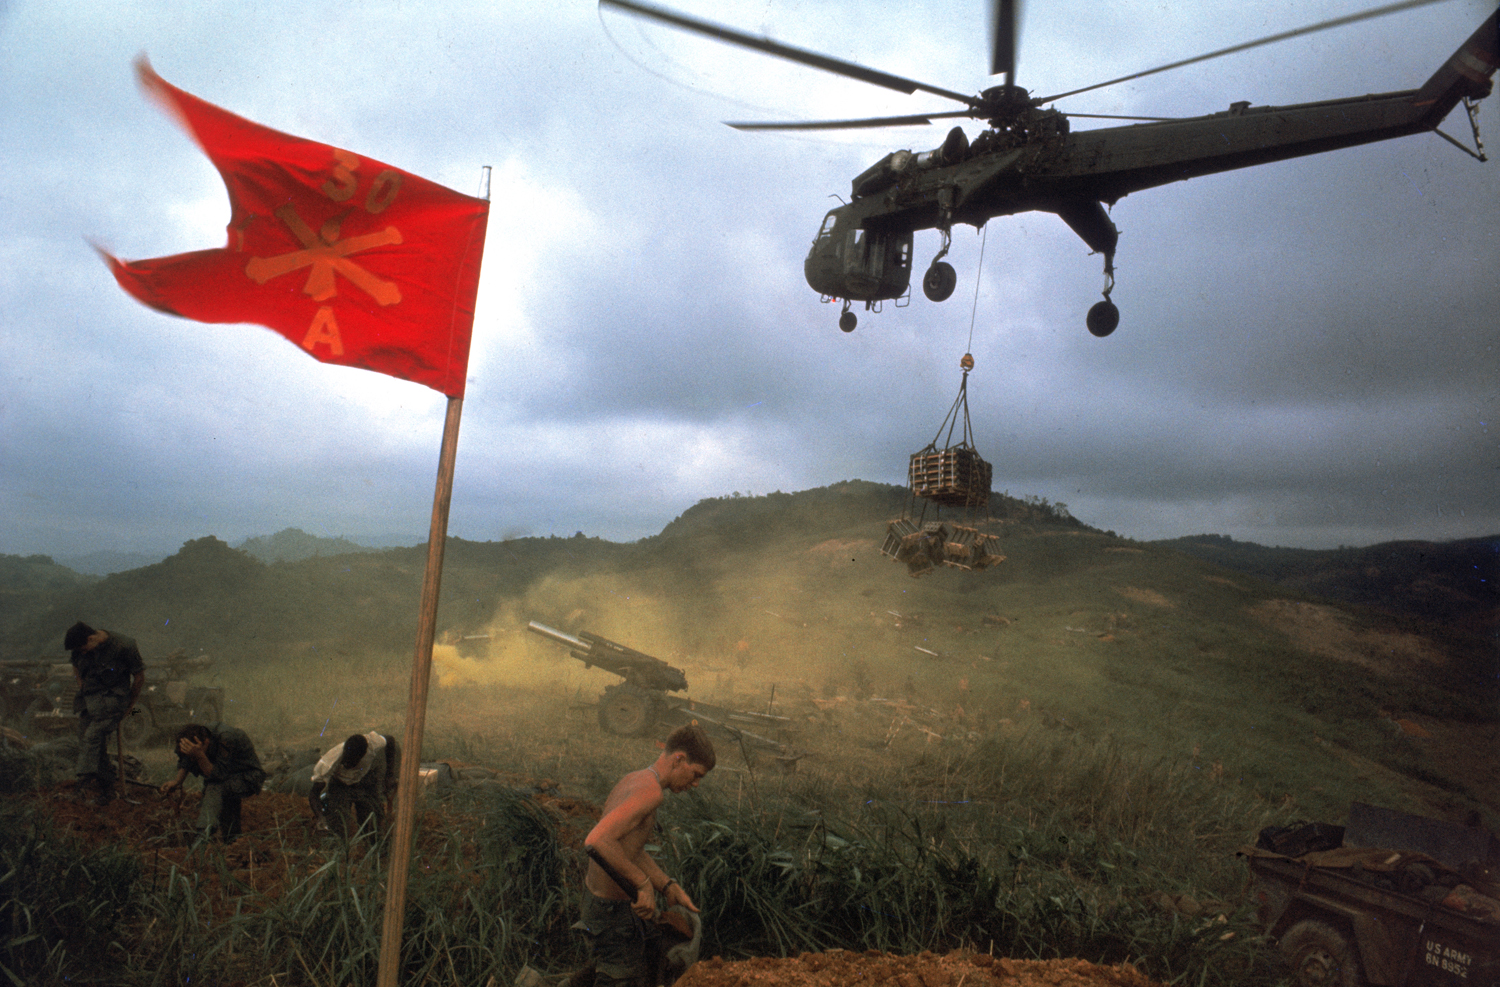 An American 1st Air Cavalry helicopter airlifts supplies into a Marine outpost during Operation Pegasus, Vietnam, spring 1968.